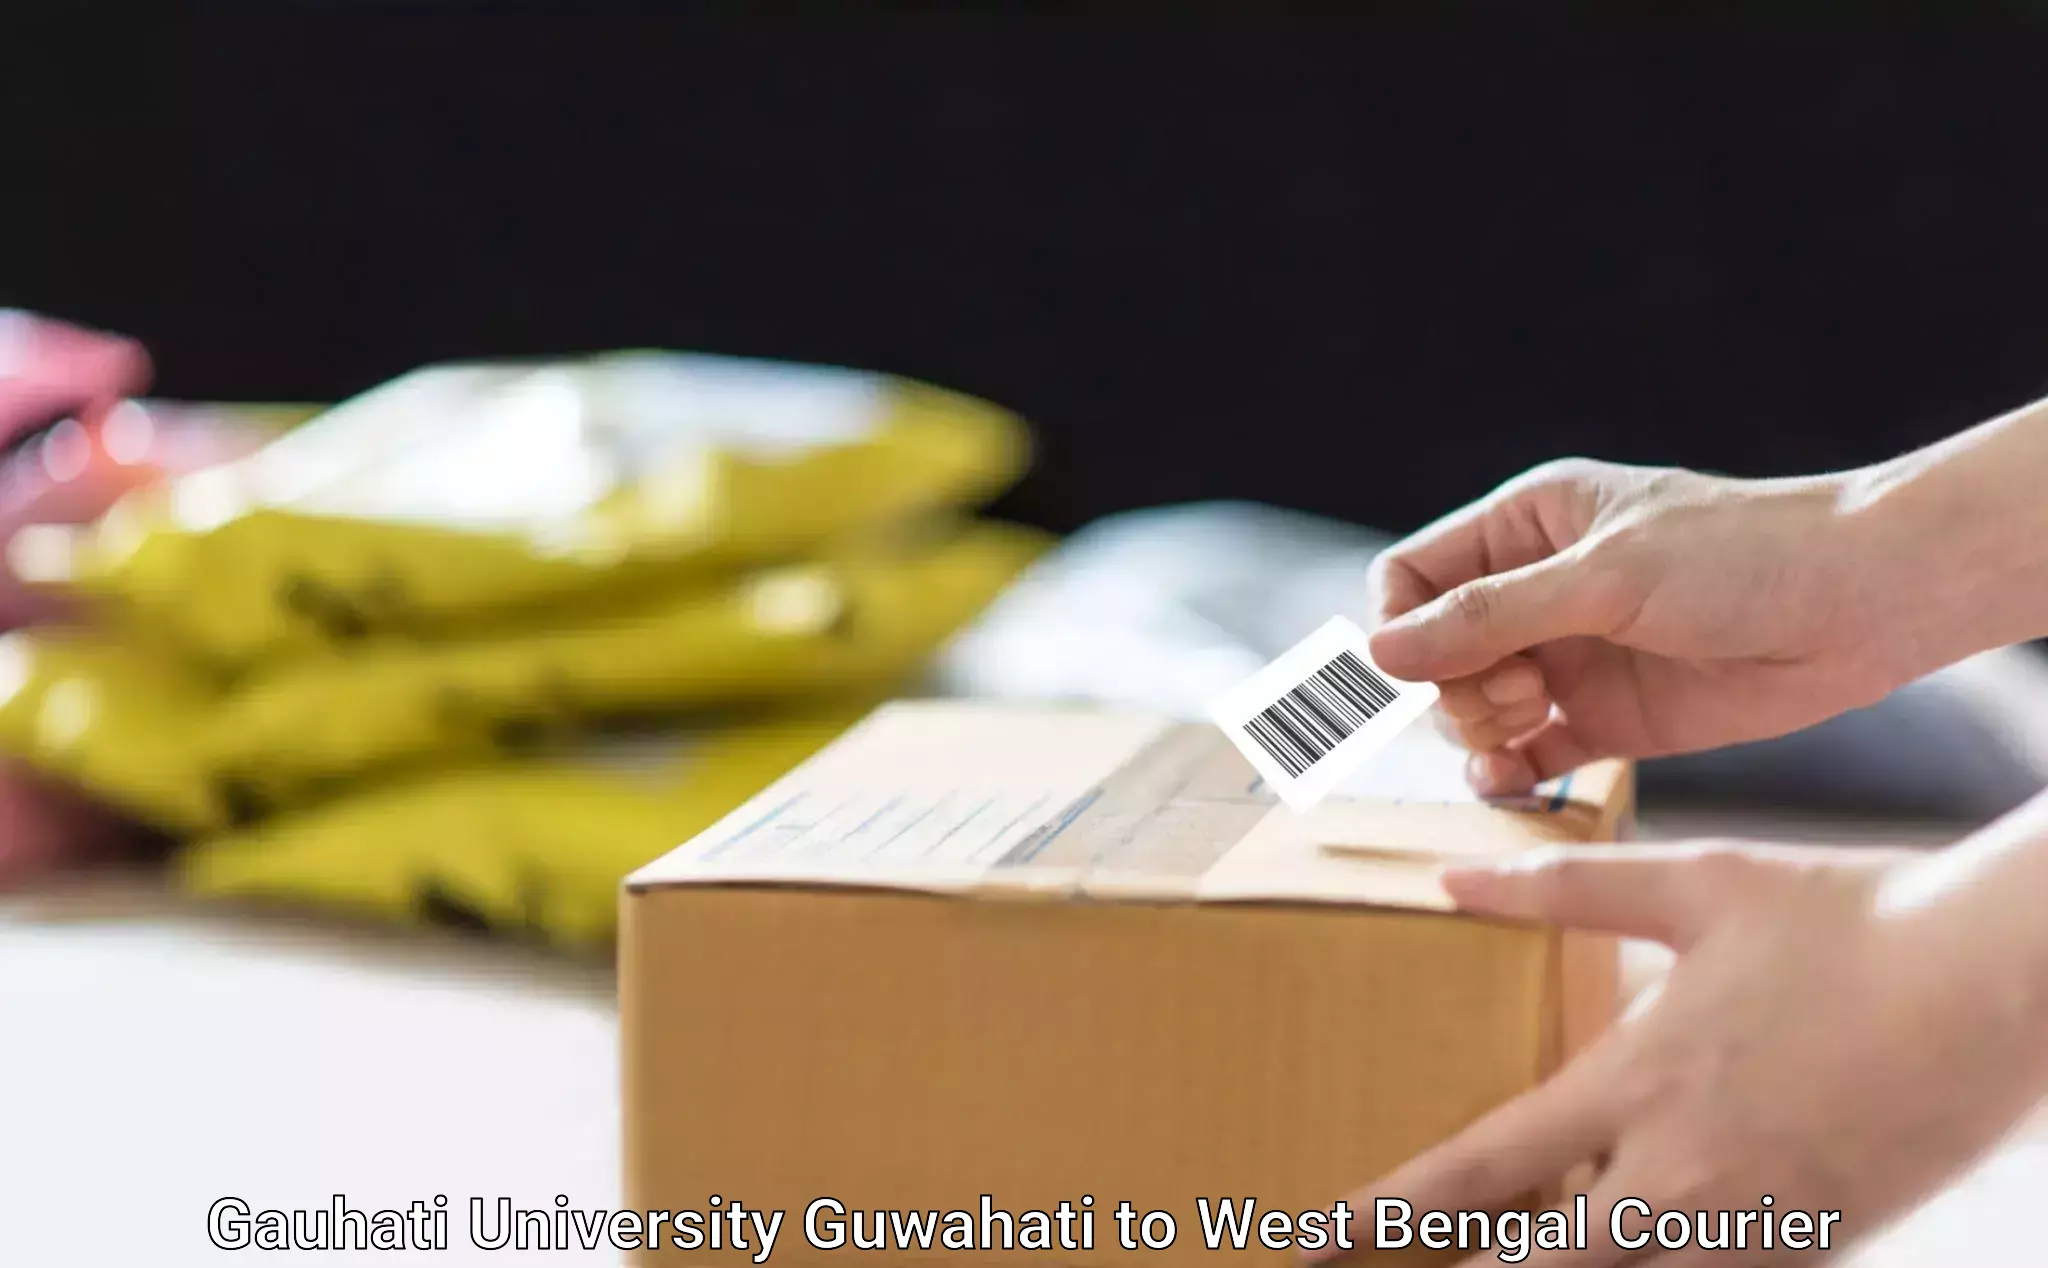 Small business couriers Gauhati University Guwahati to West Bengal